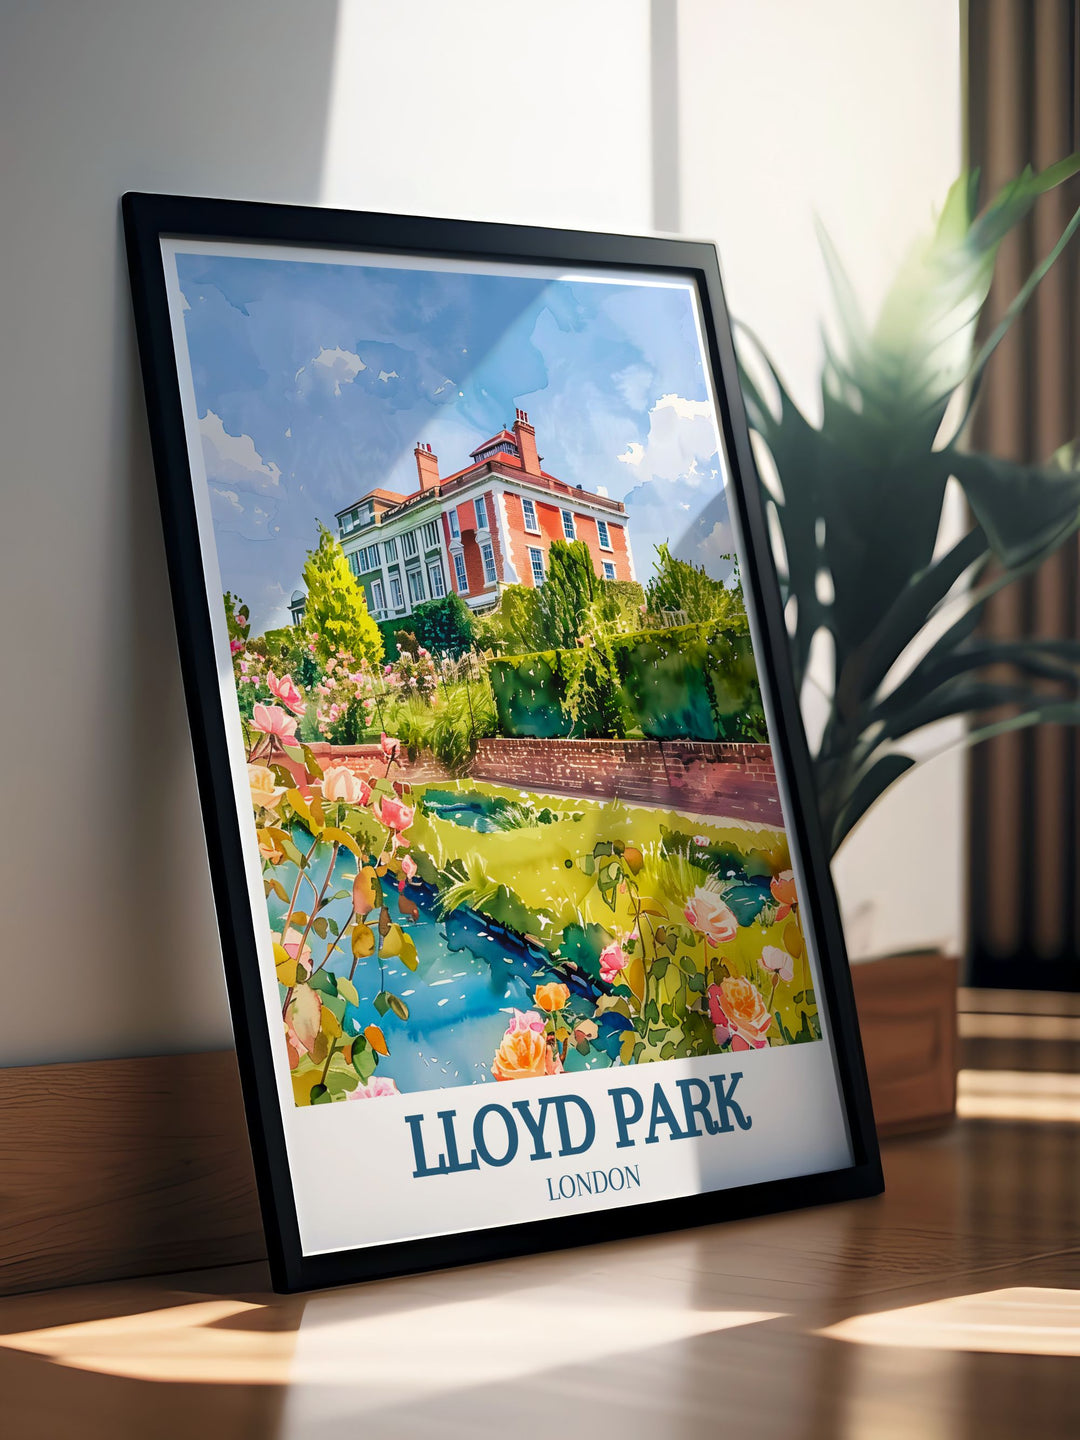 Captivating vintage travel print of Lloyd Parks rose garden at William Morris gallery. Ideal for enhancing your home decor. Bring a touch of nature and history into your living space with this exquisite artwork.